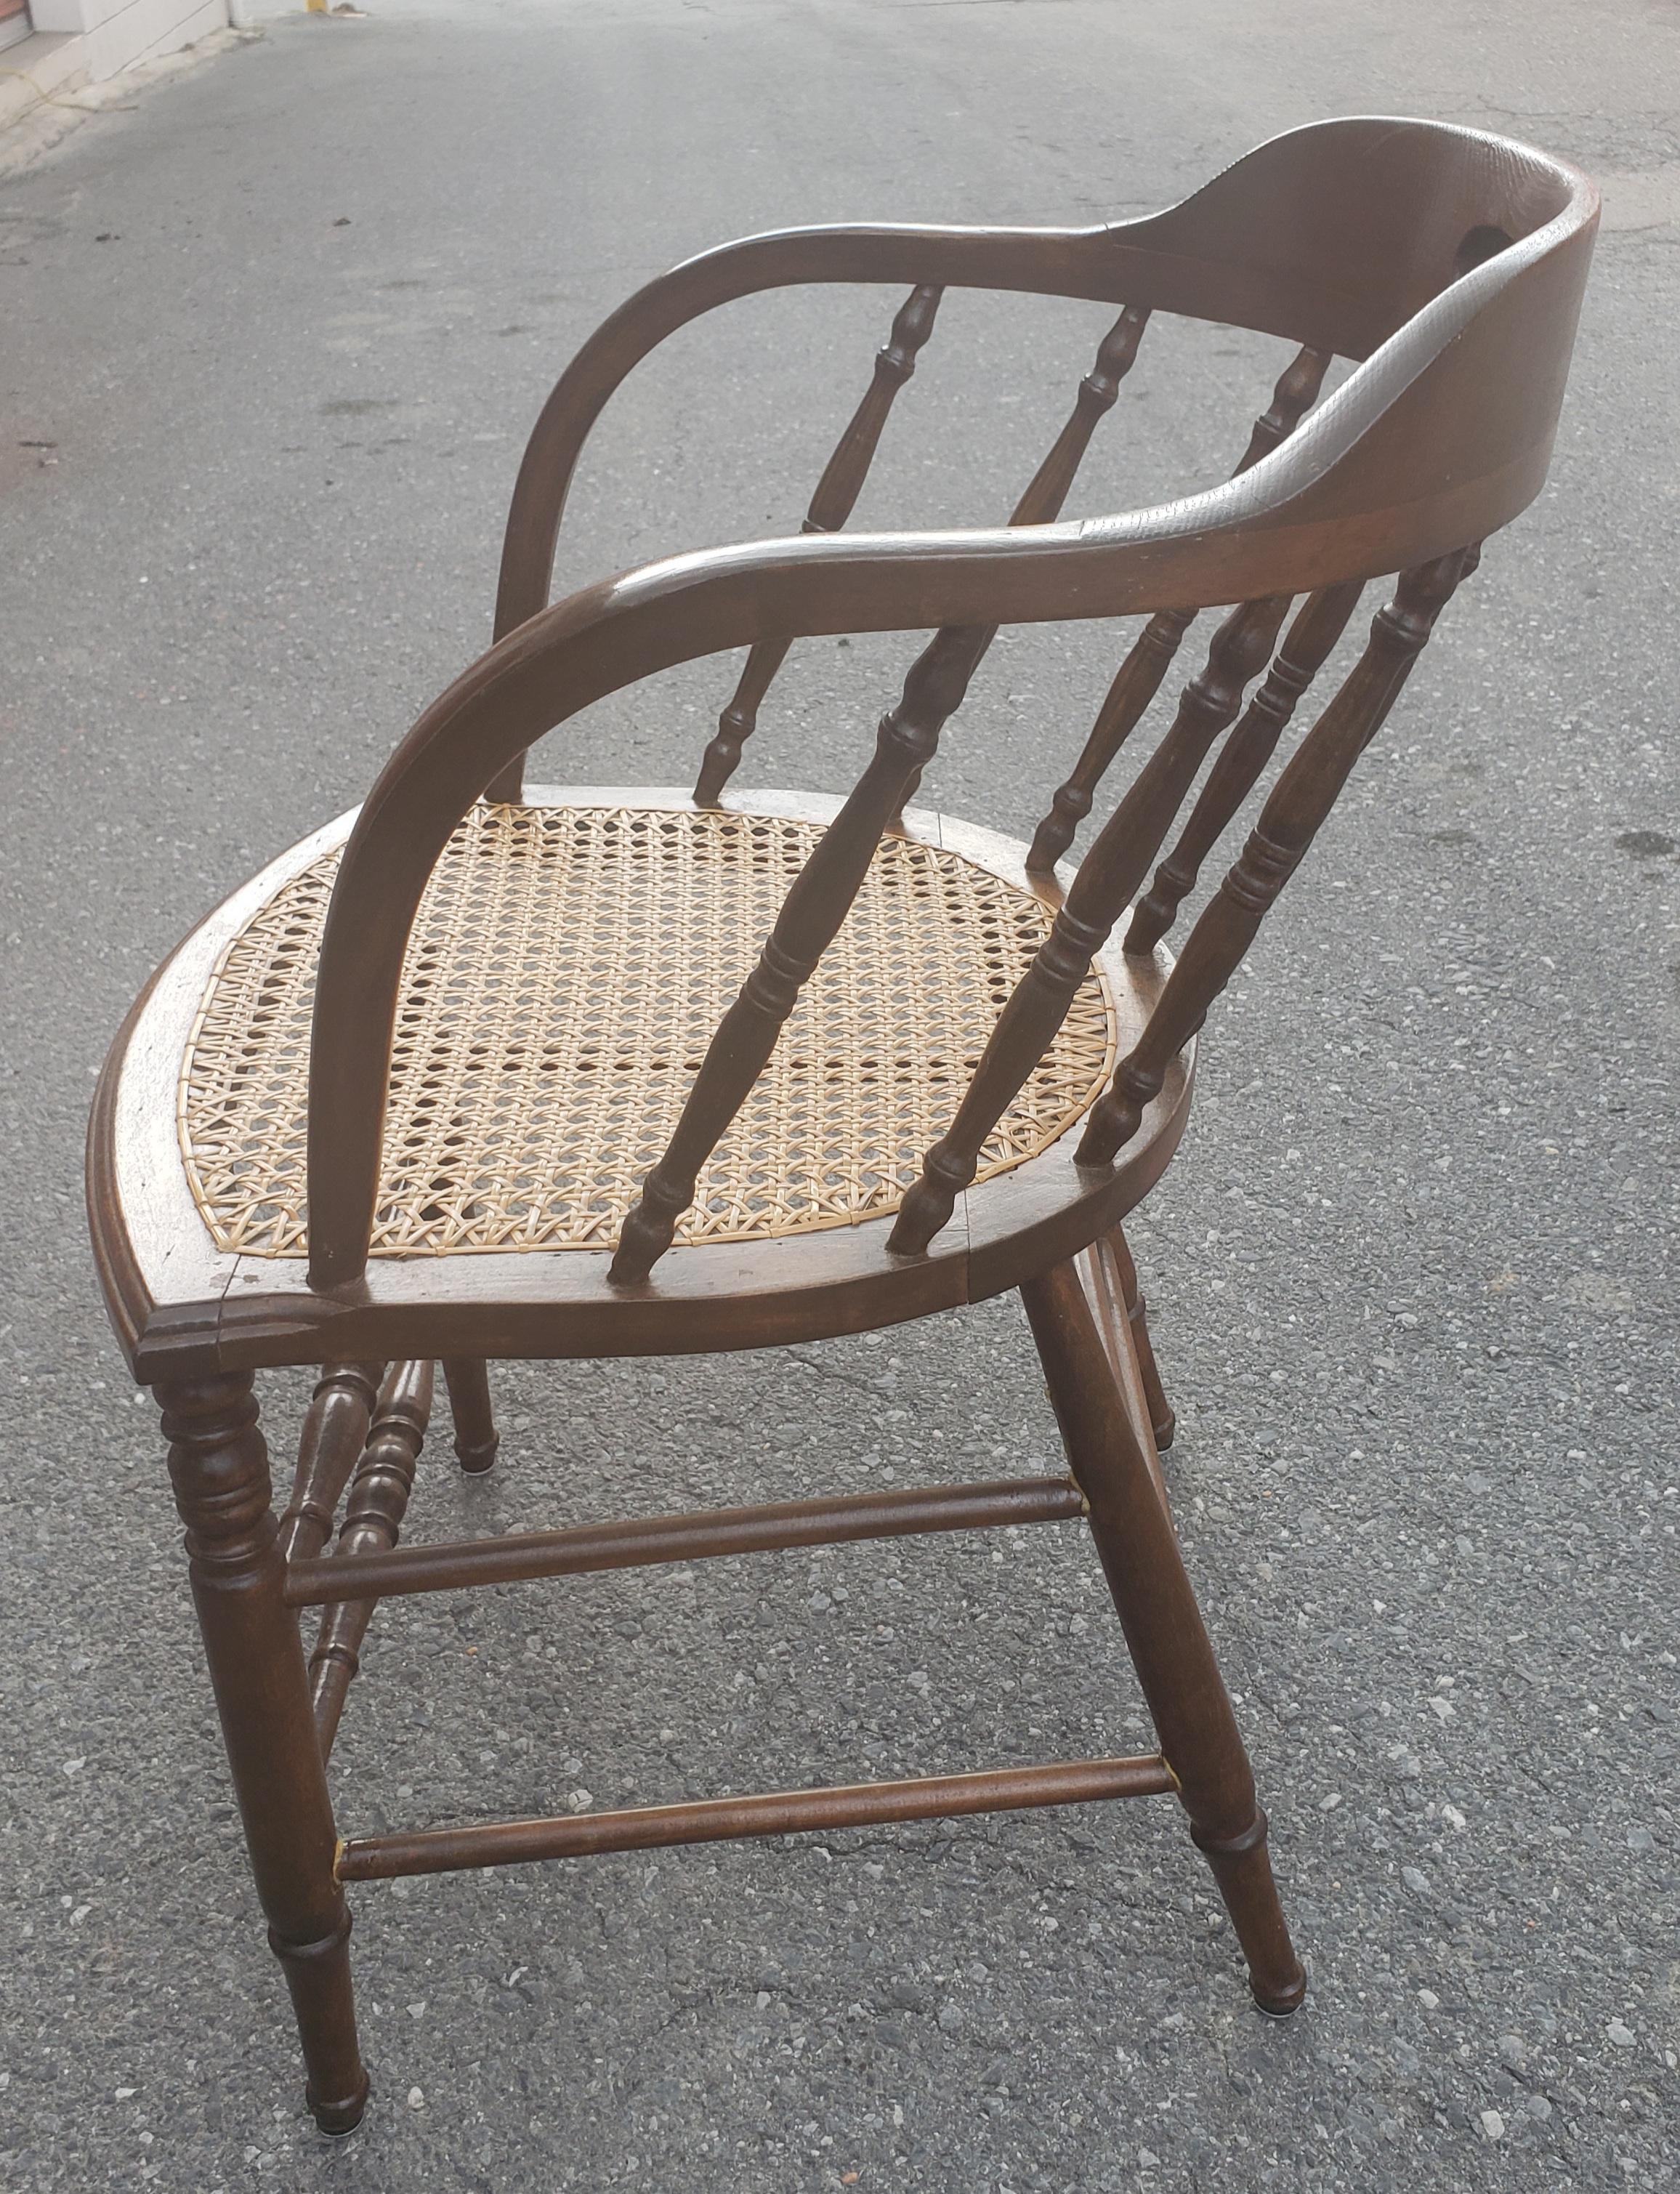 Antique Barrel Back Firehouse Windsor Chair with Cane Seat 1